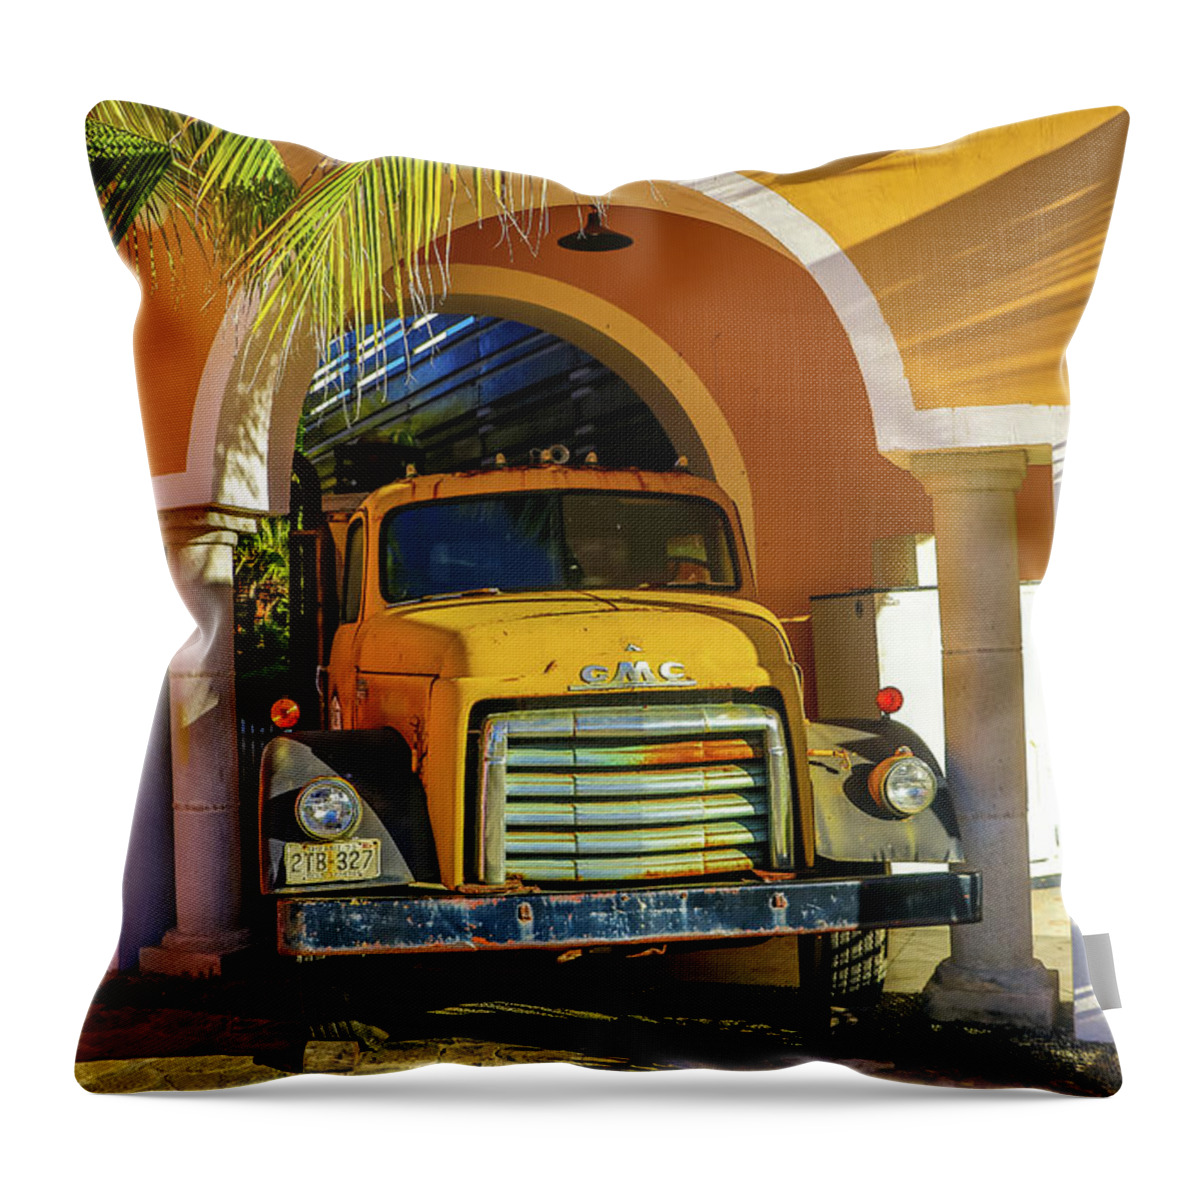 Costa Maya Mexico Throw Pillow featuring the photograph Costa Maya Mexico by Paul James Bannerman